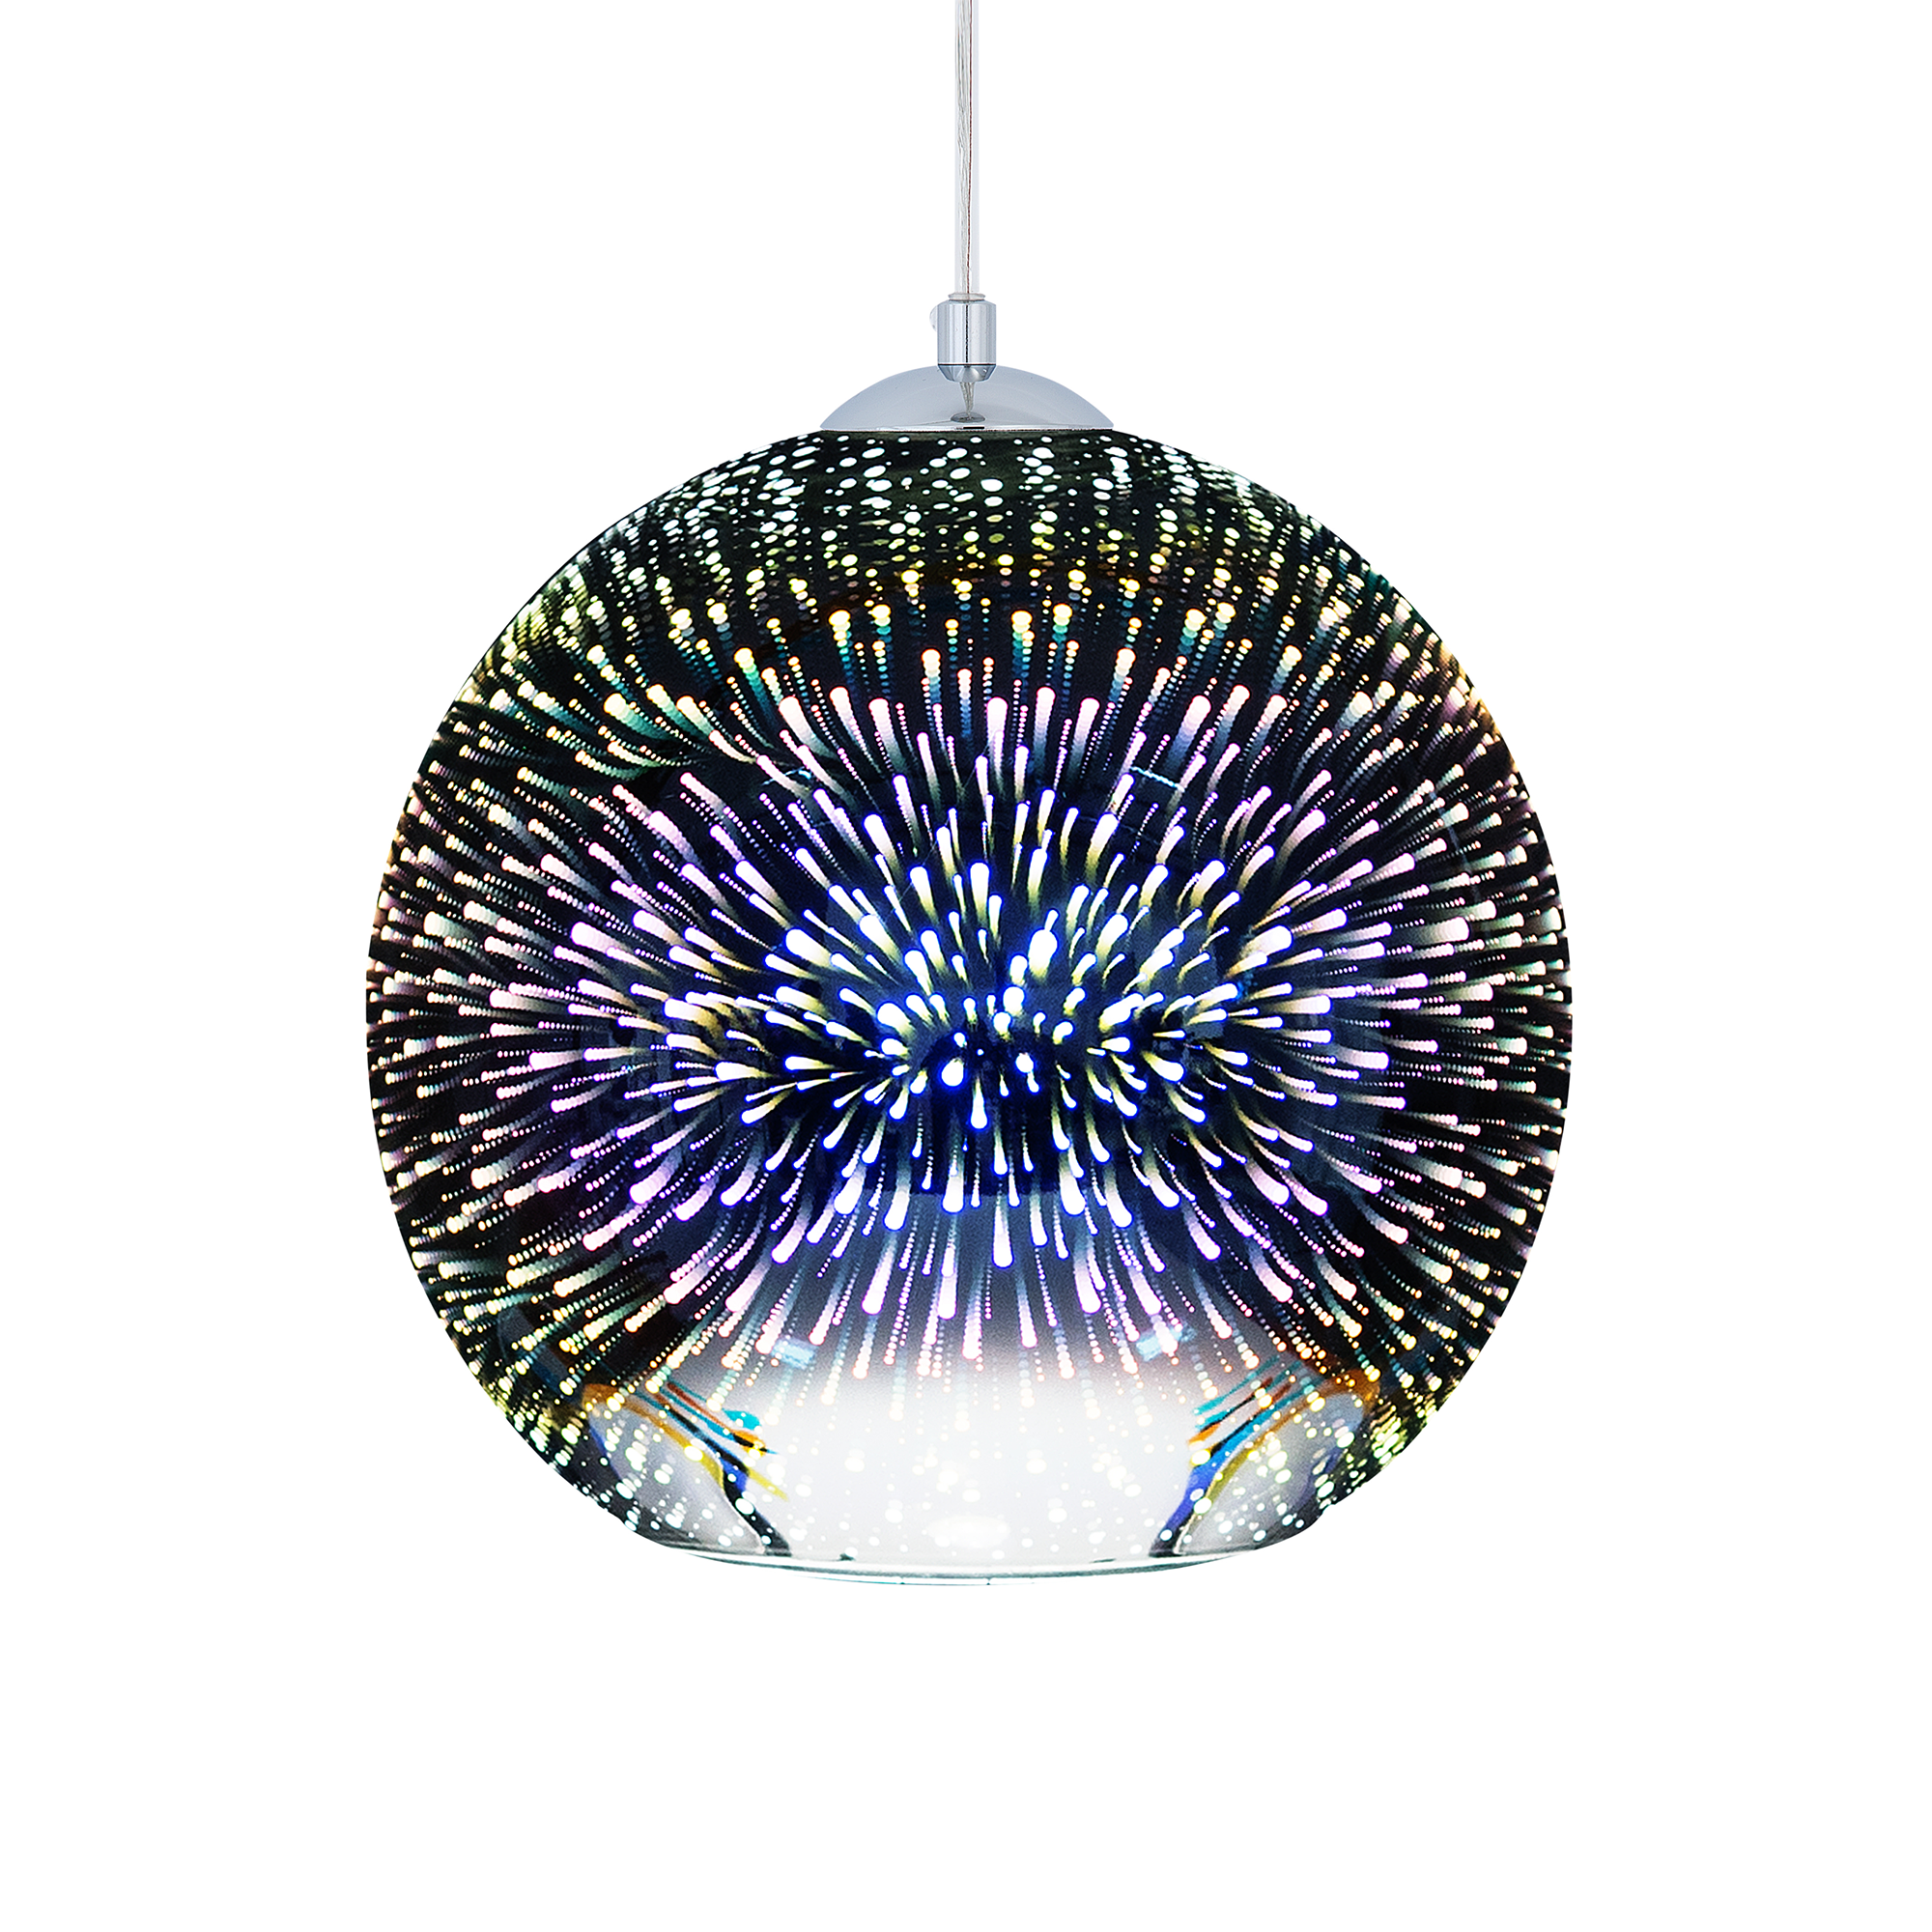 Beliani Hanging Light Pendant Lamp Silver Highly Glossy Reflective Glass Ball Shade Eclectic Glamorous Design